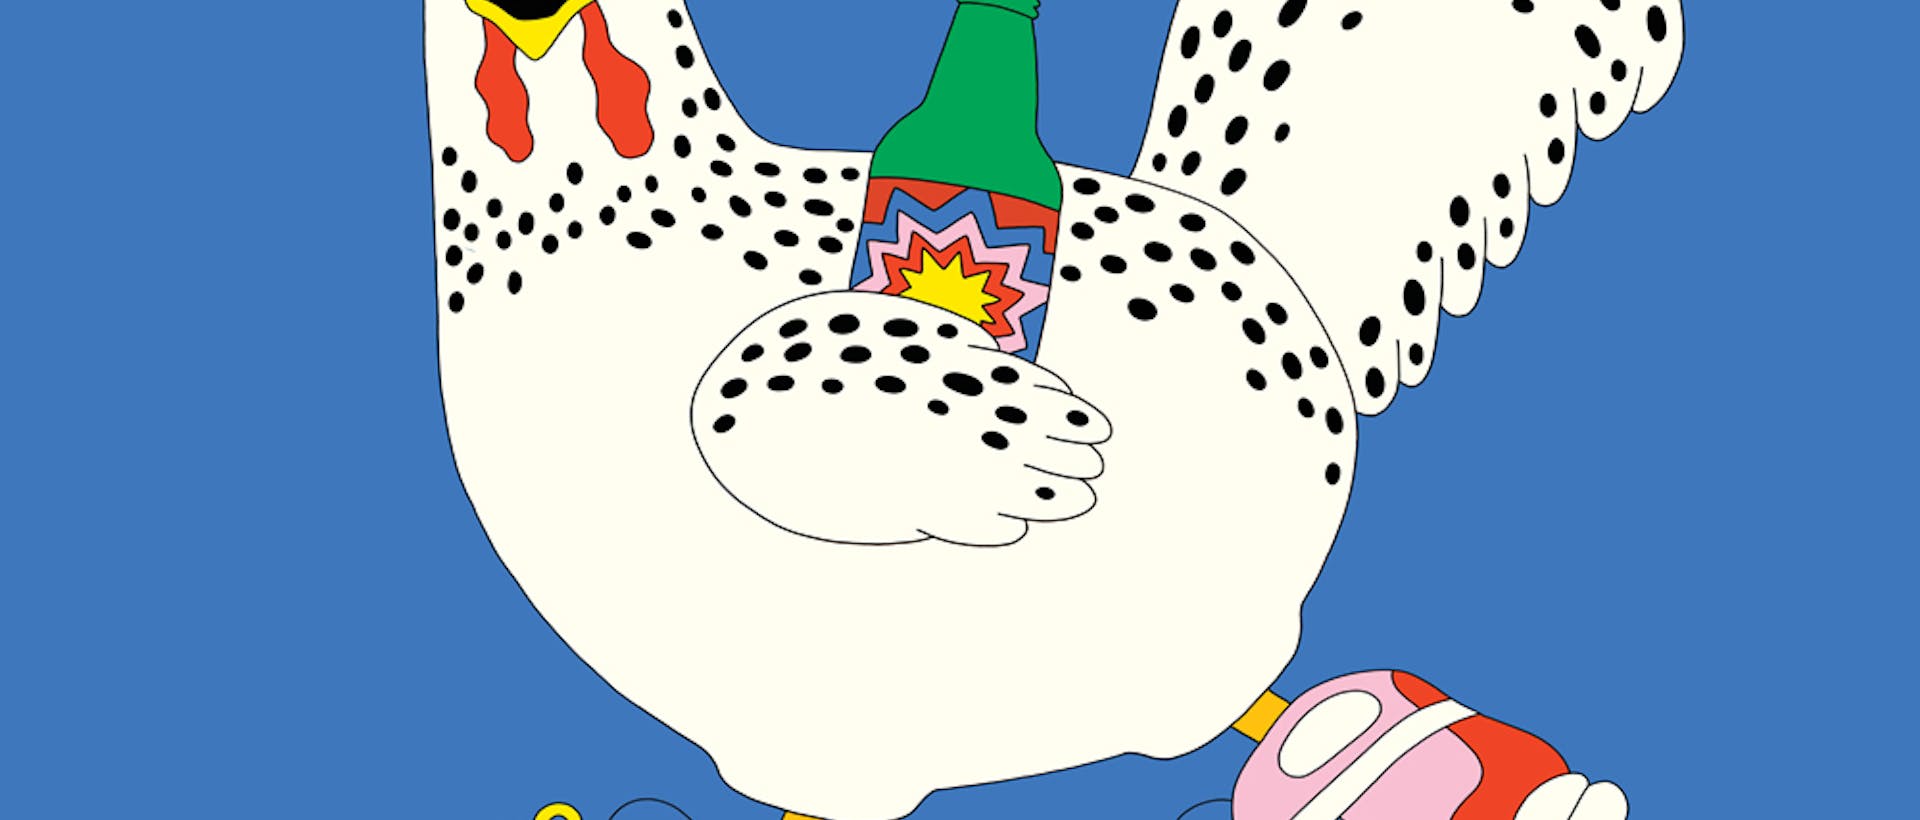 Cartoon of a chicken wearing large sneakers and sunglasses running past holding a beer bottle